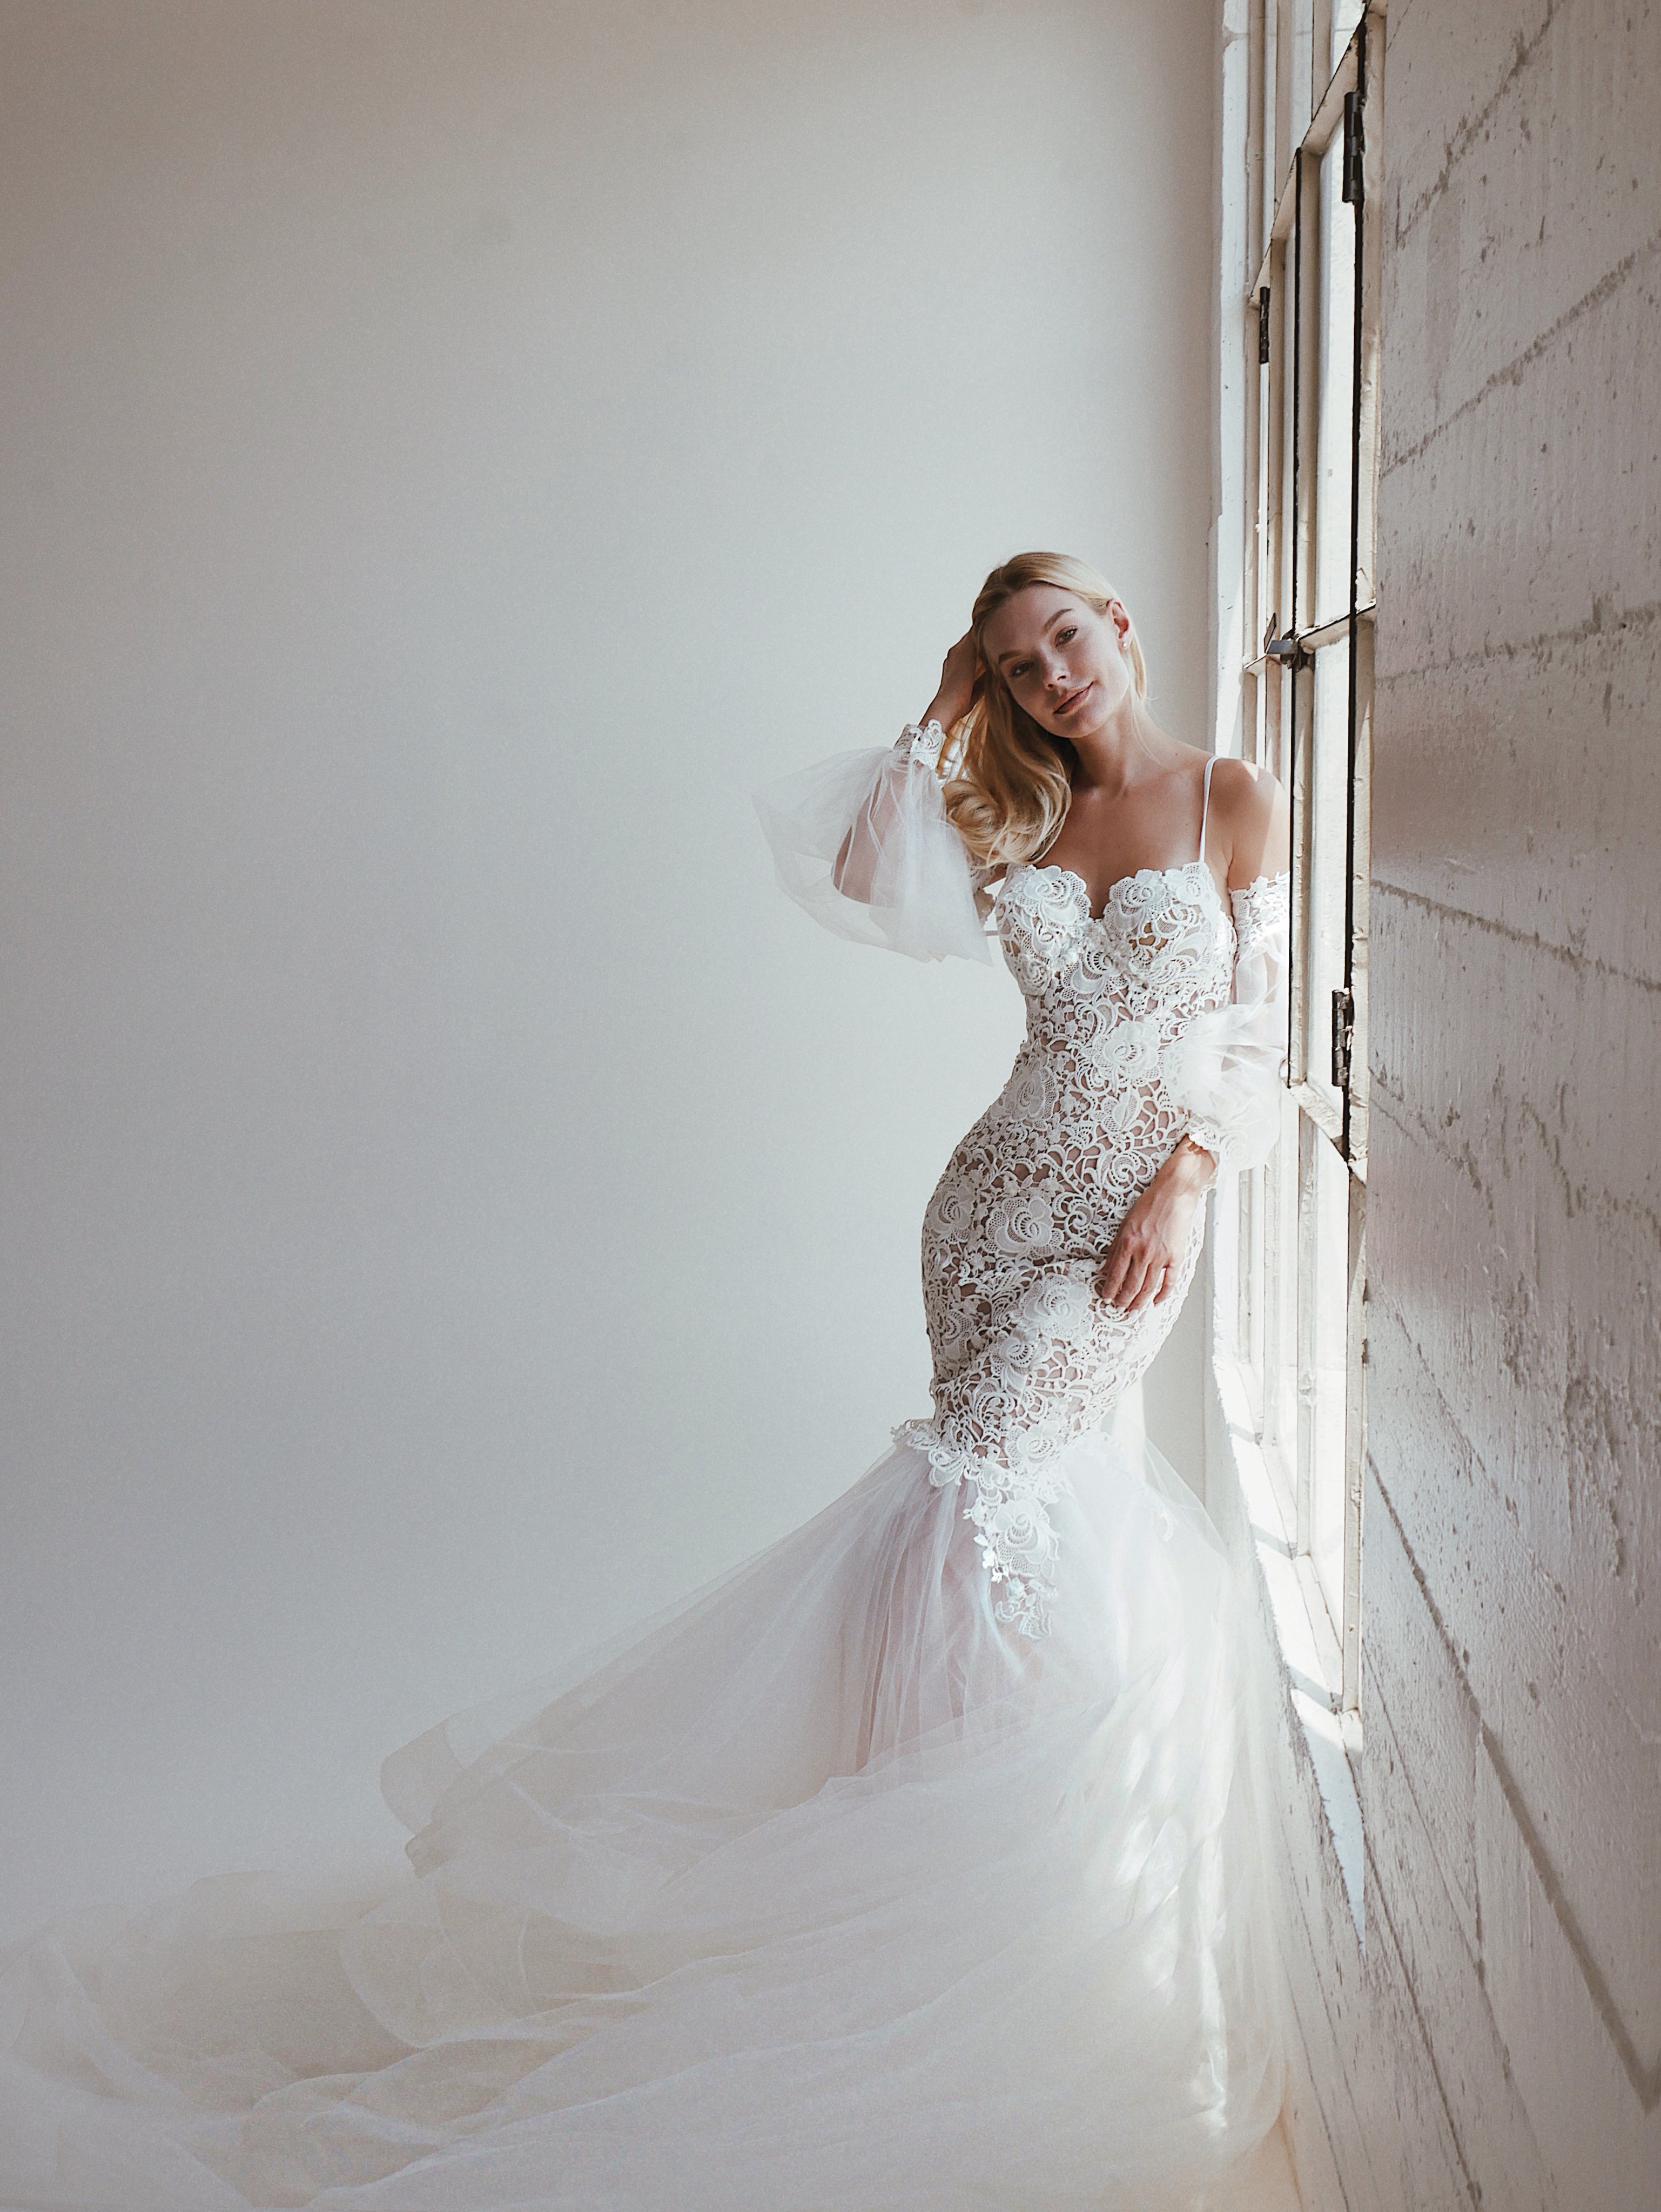 Bohemian lace mermaid wedding dress with detachable sleeves and train by Lauren Elaine Bridal.